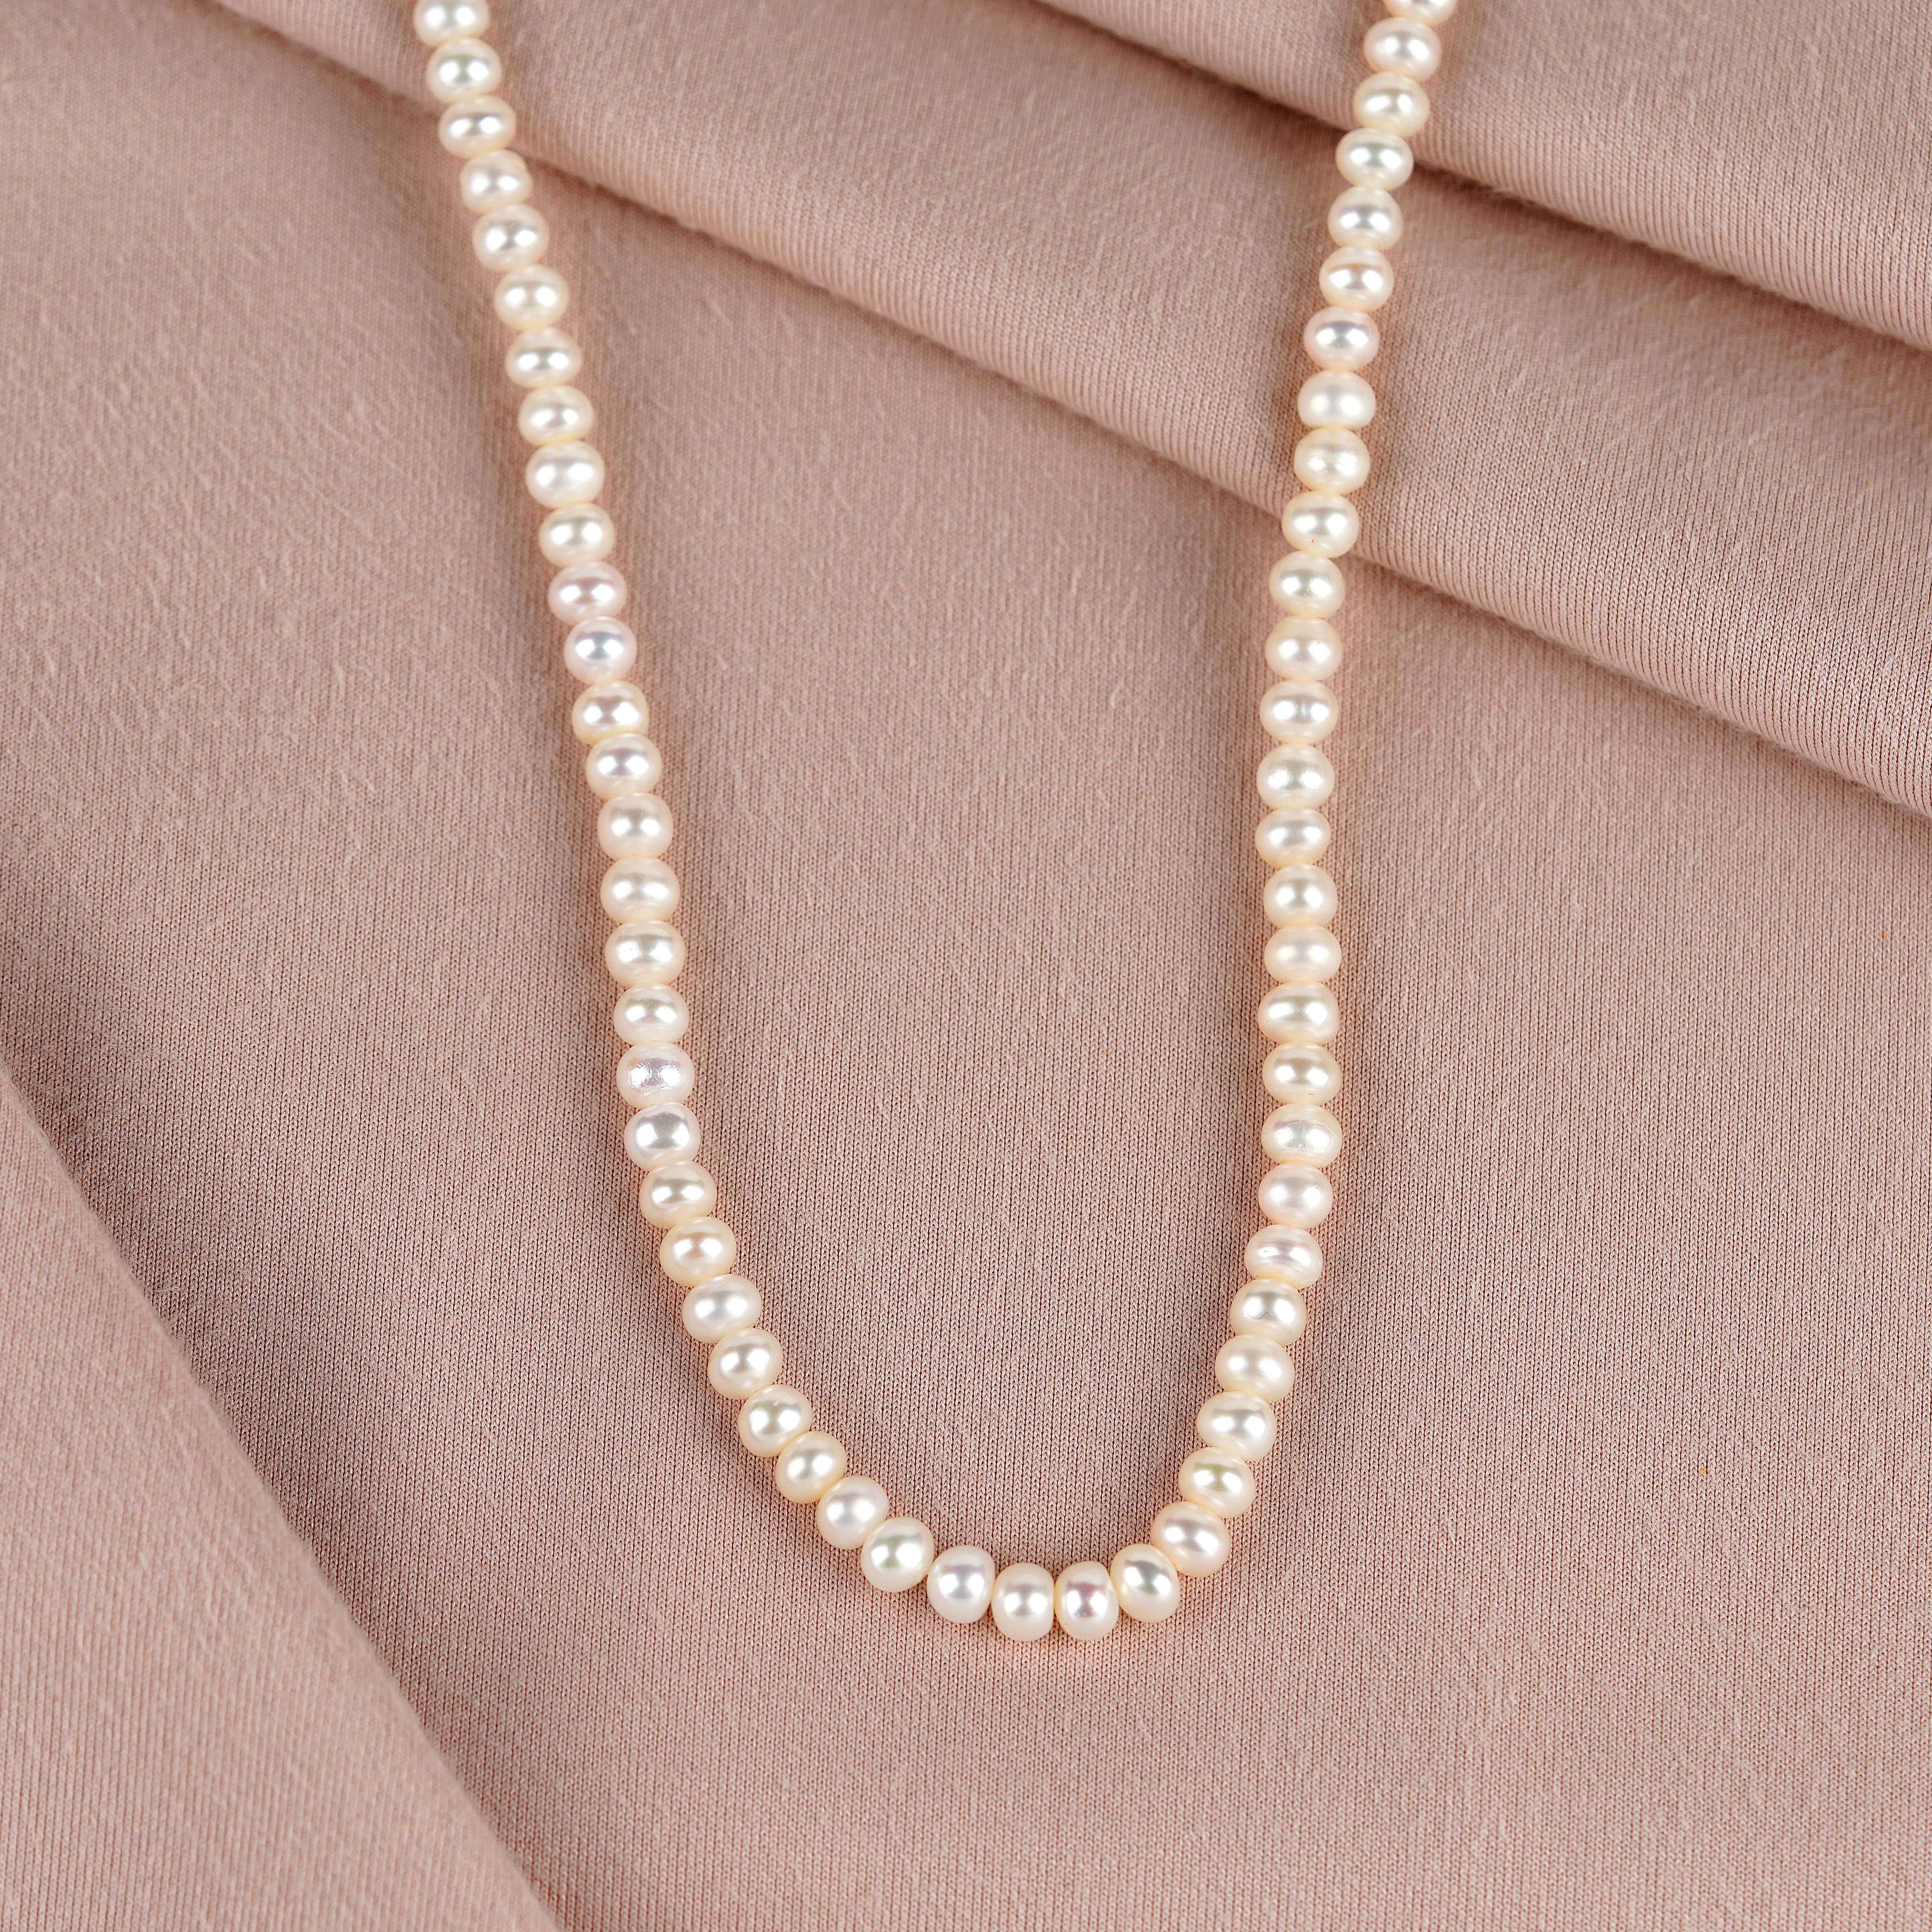 A Radiant White Pearl Button Necklace